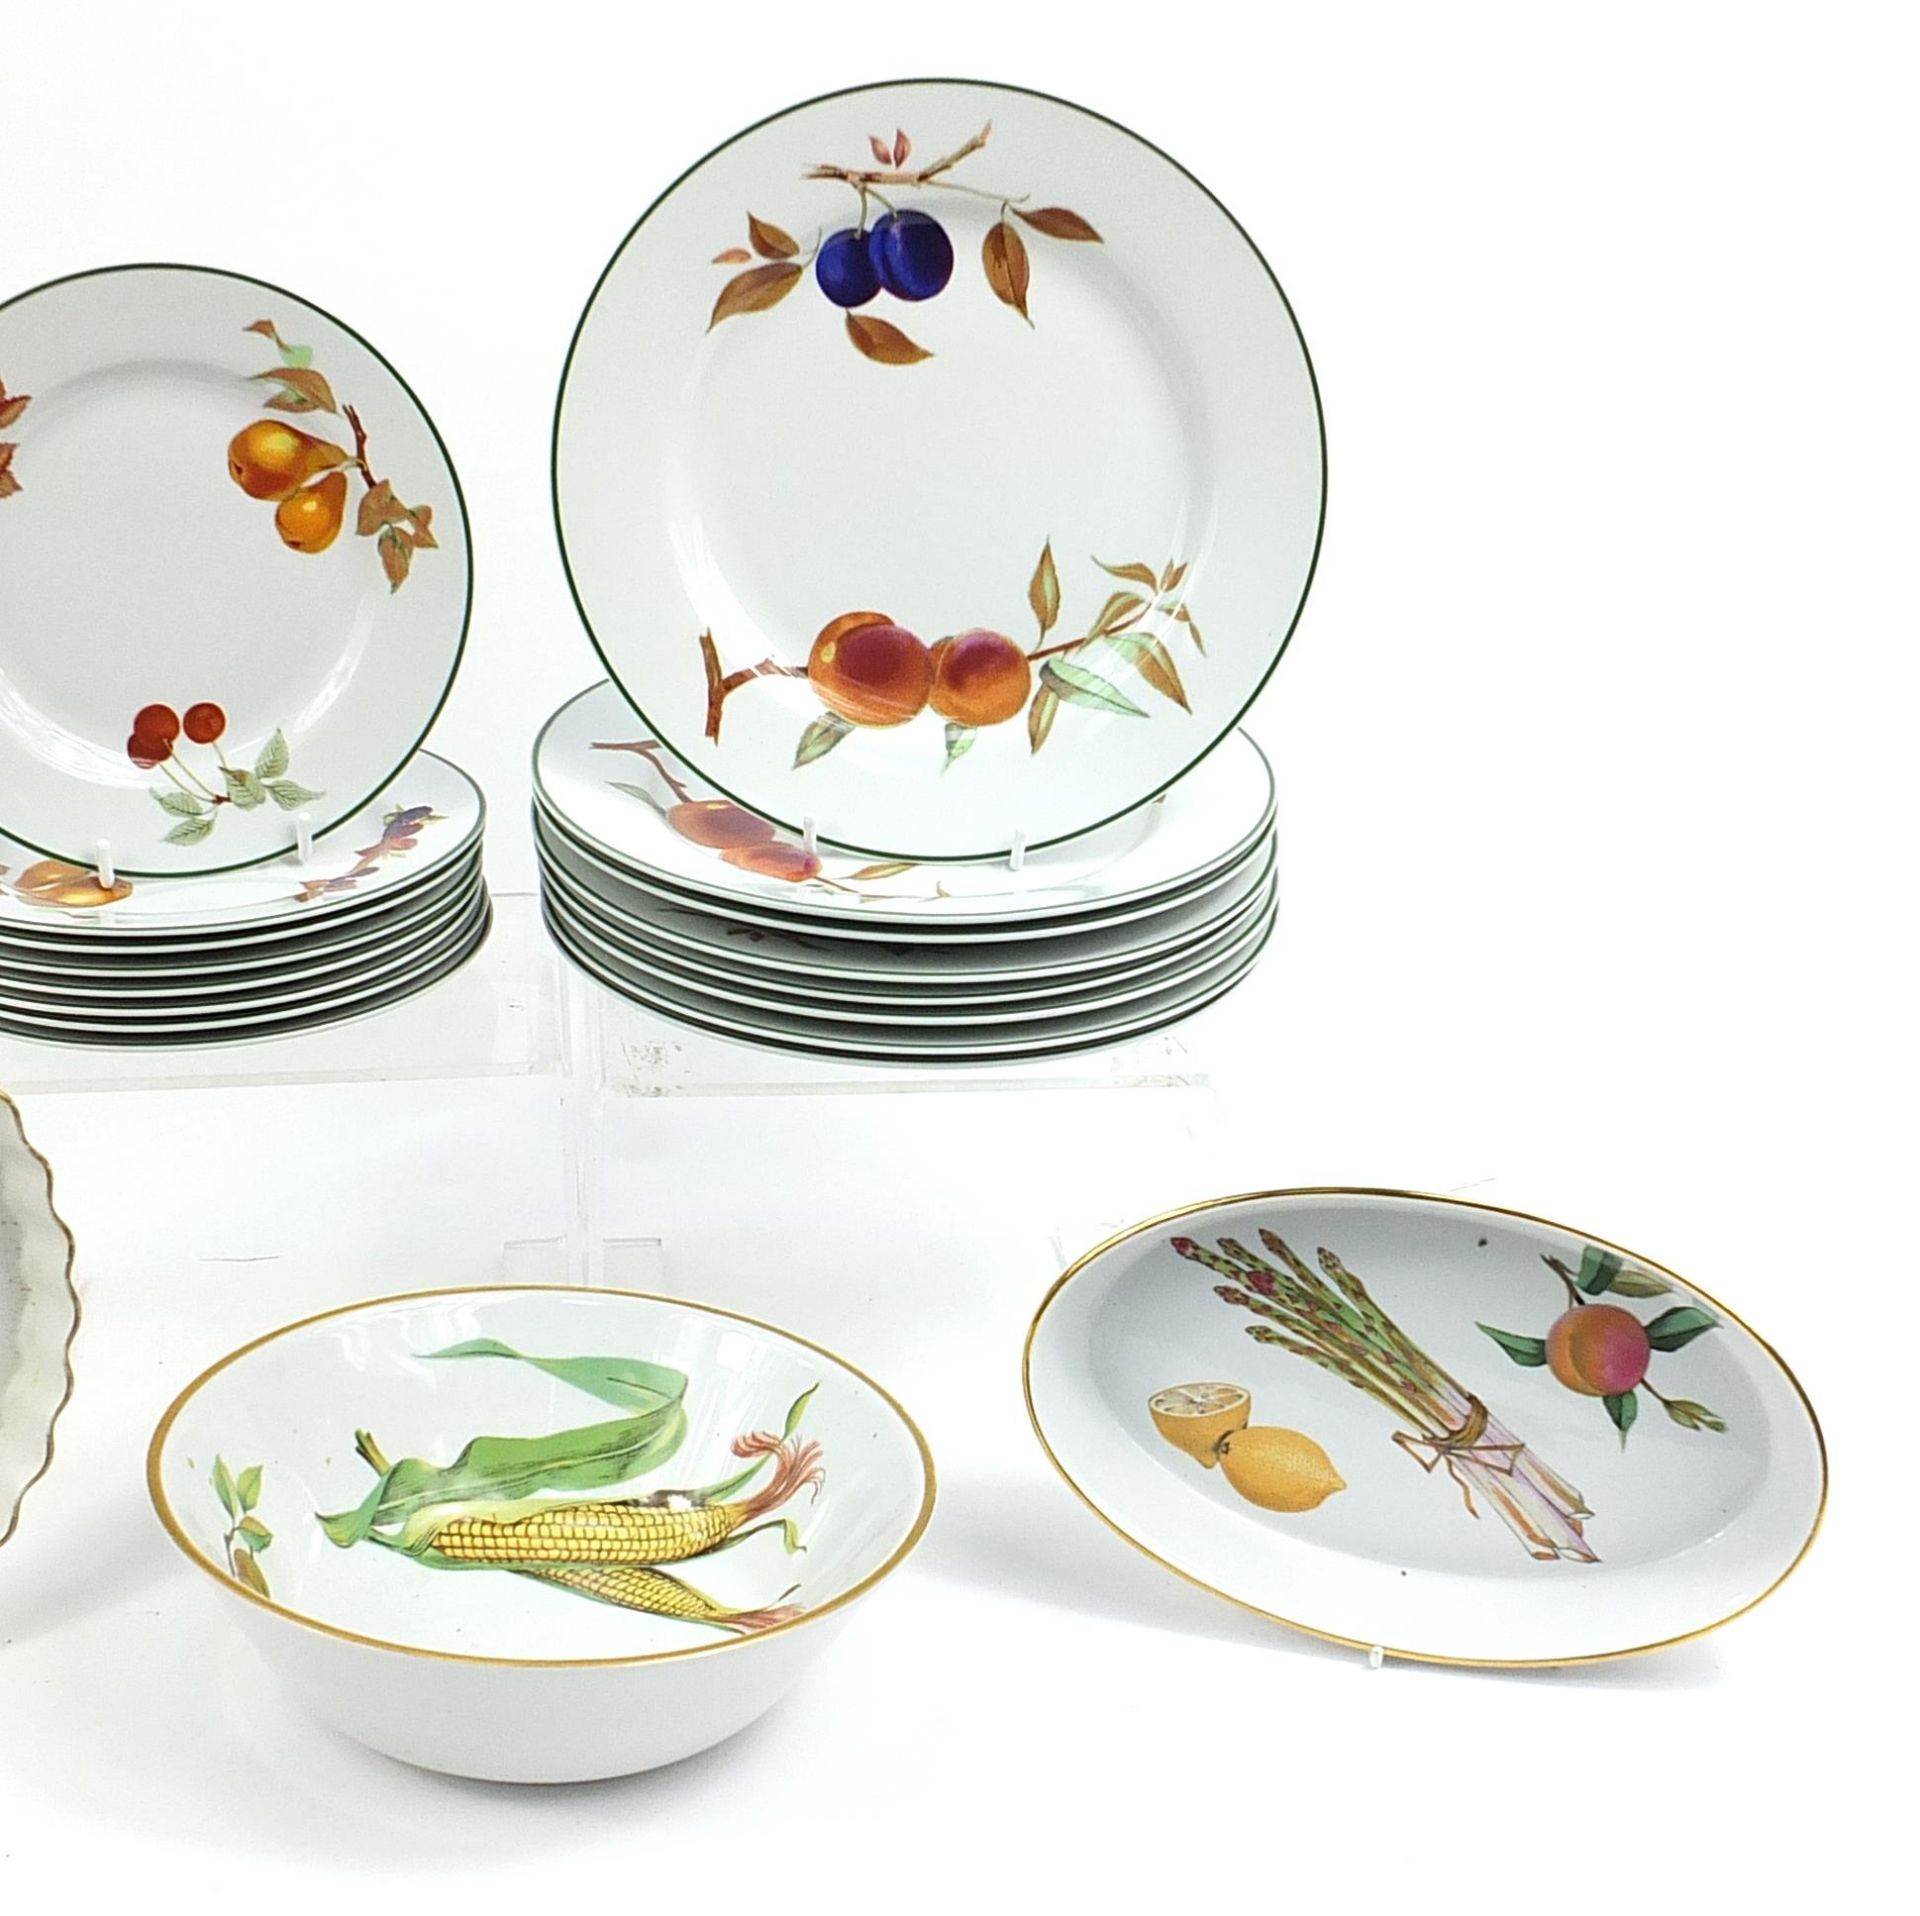 Royal Worcester Fruit tableware including plates, dishes and an ovenproof Evesham flan dish - Image 3 of 4